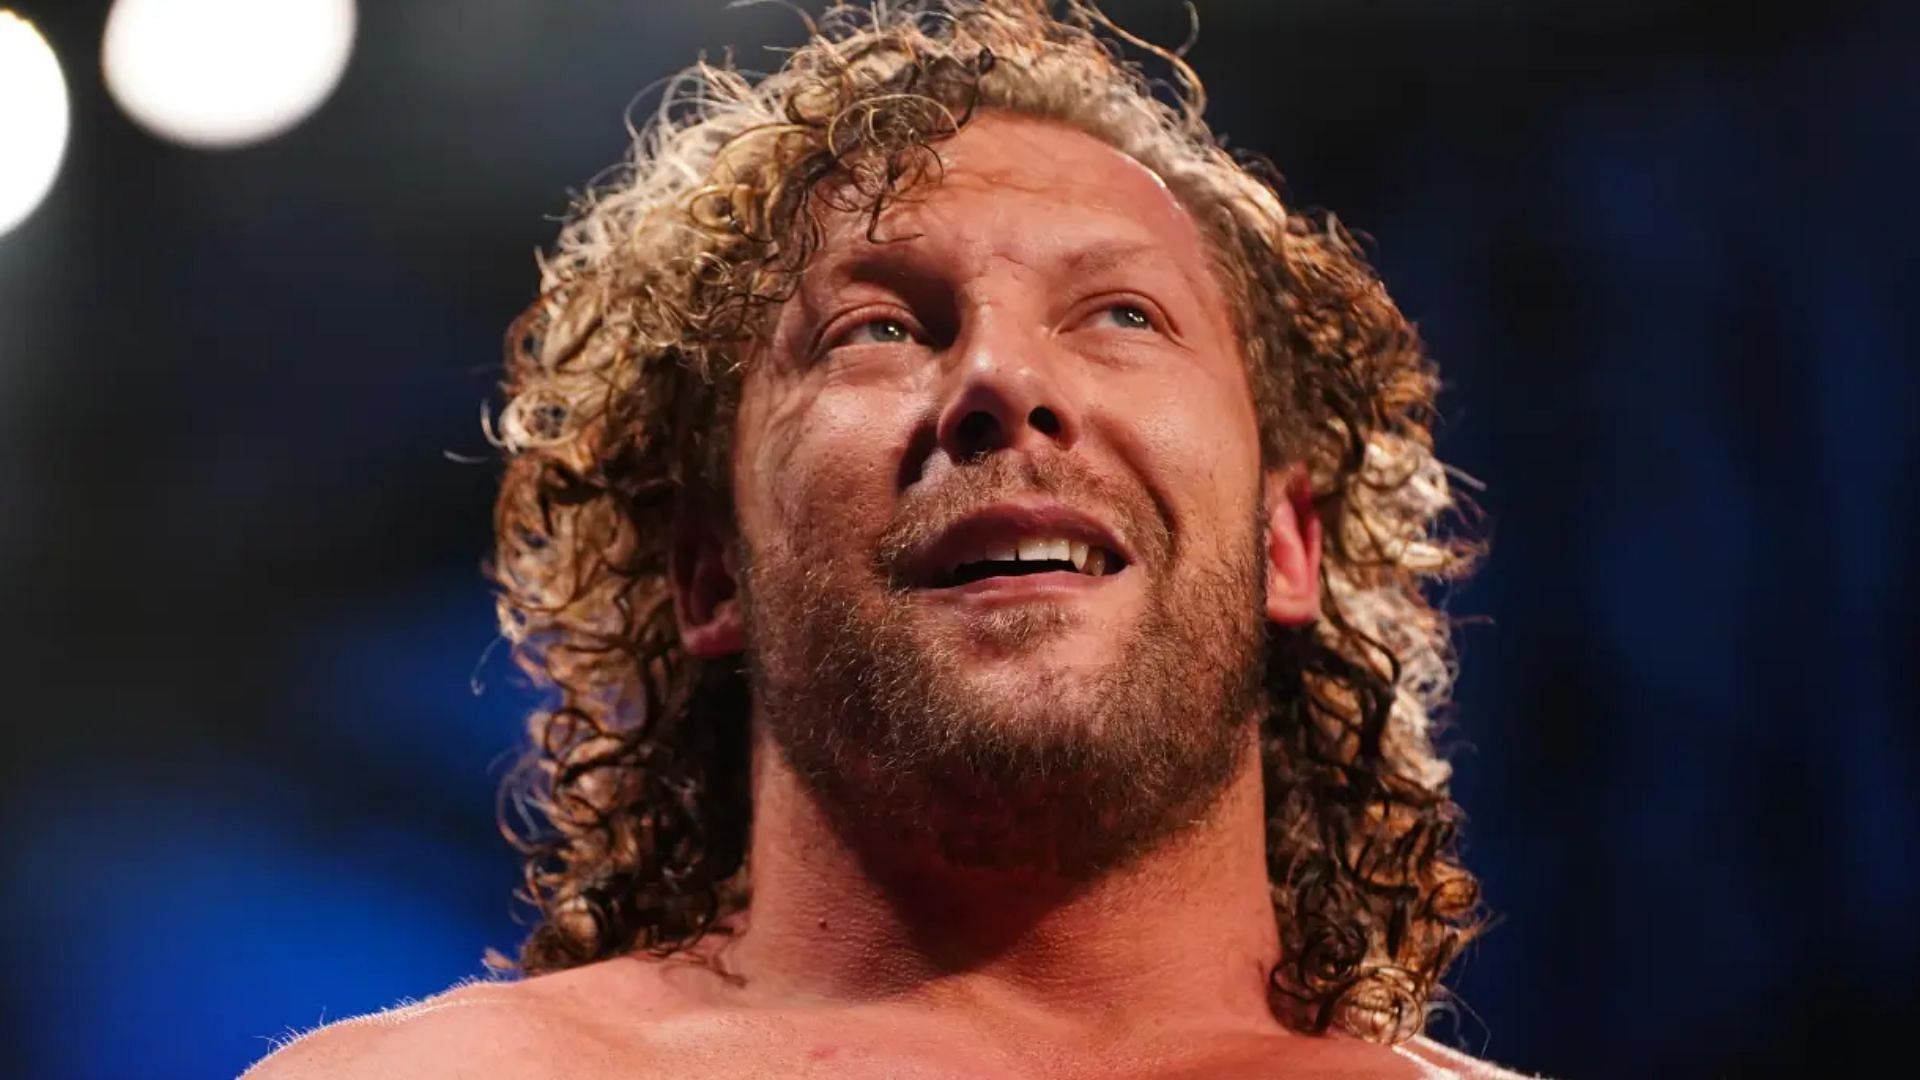 Kenny Omega loves pushing his body to its limits.